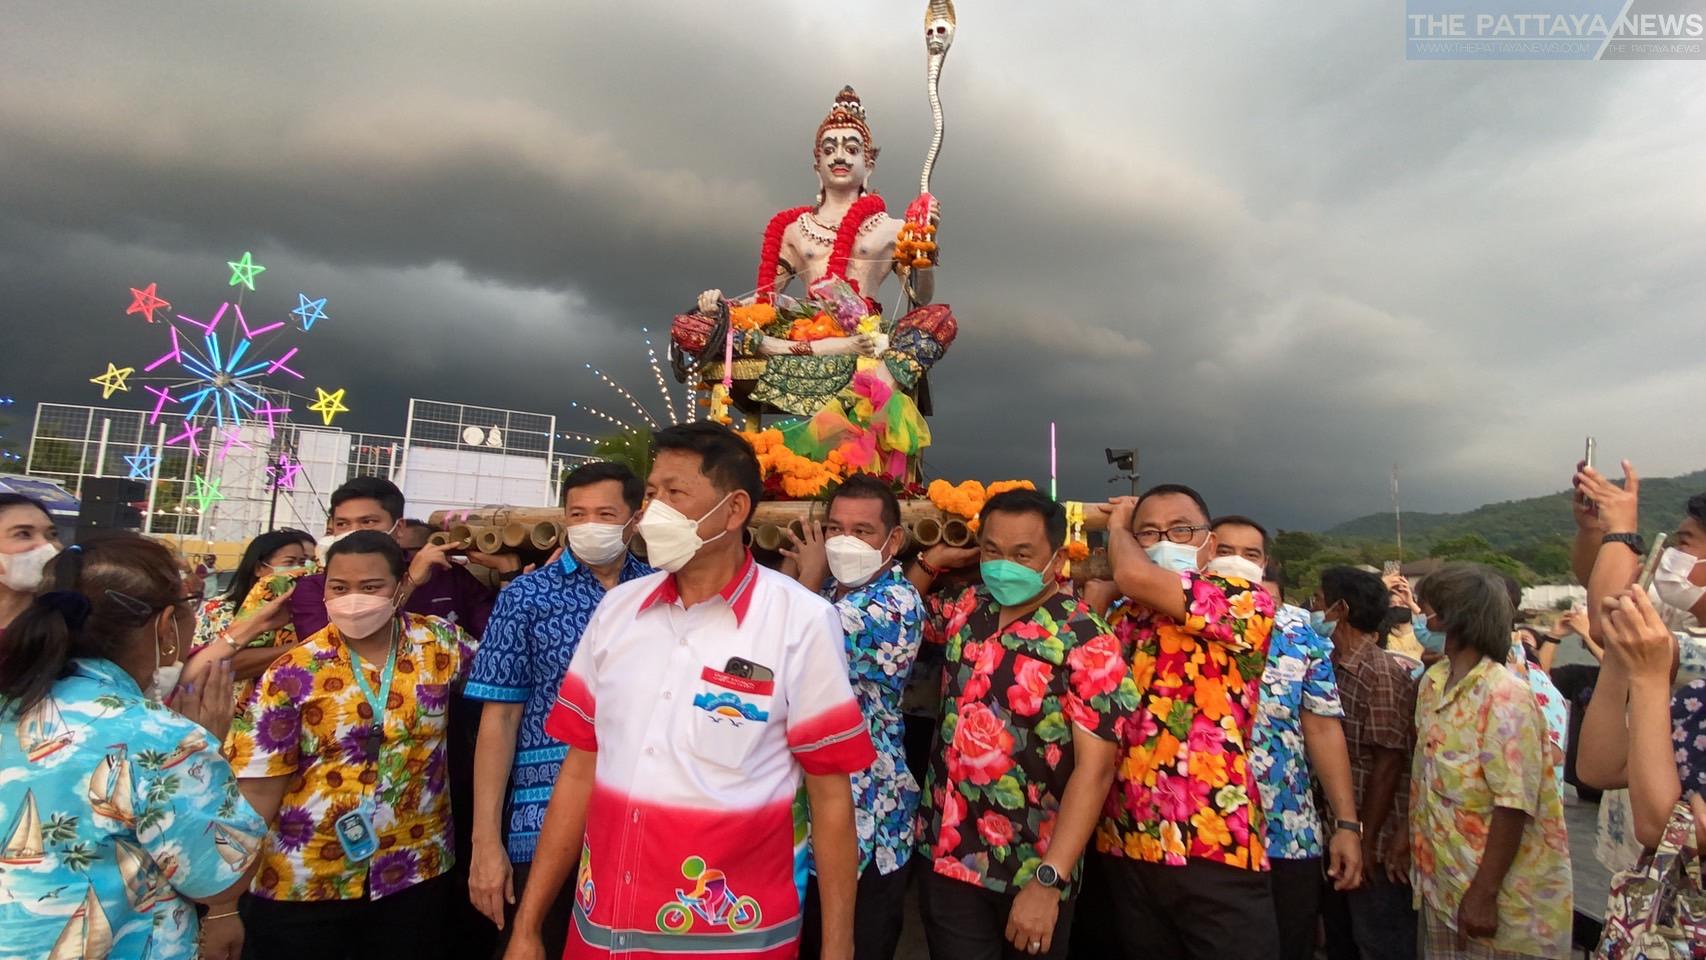 Local residents hold event to pay respect to the god of death at Sri Racha, part of Songkran ceremonies